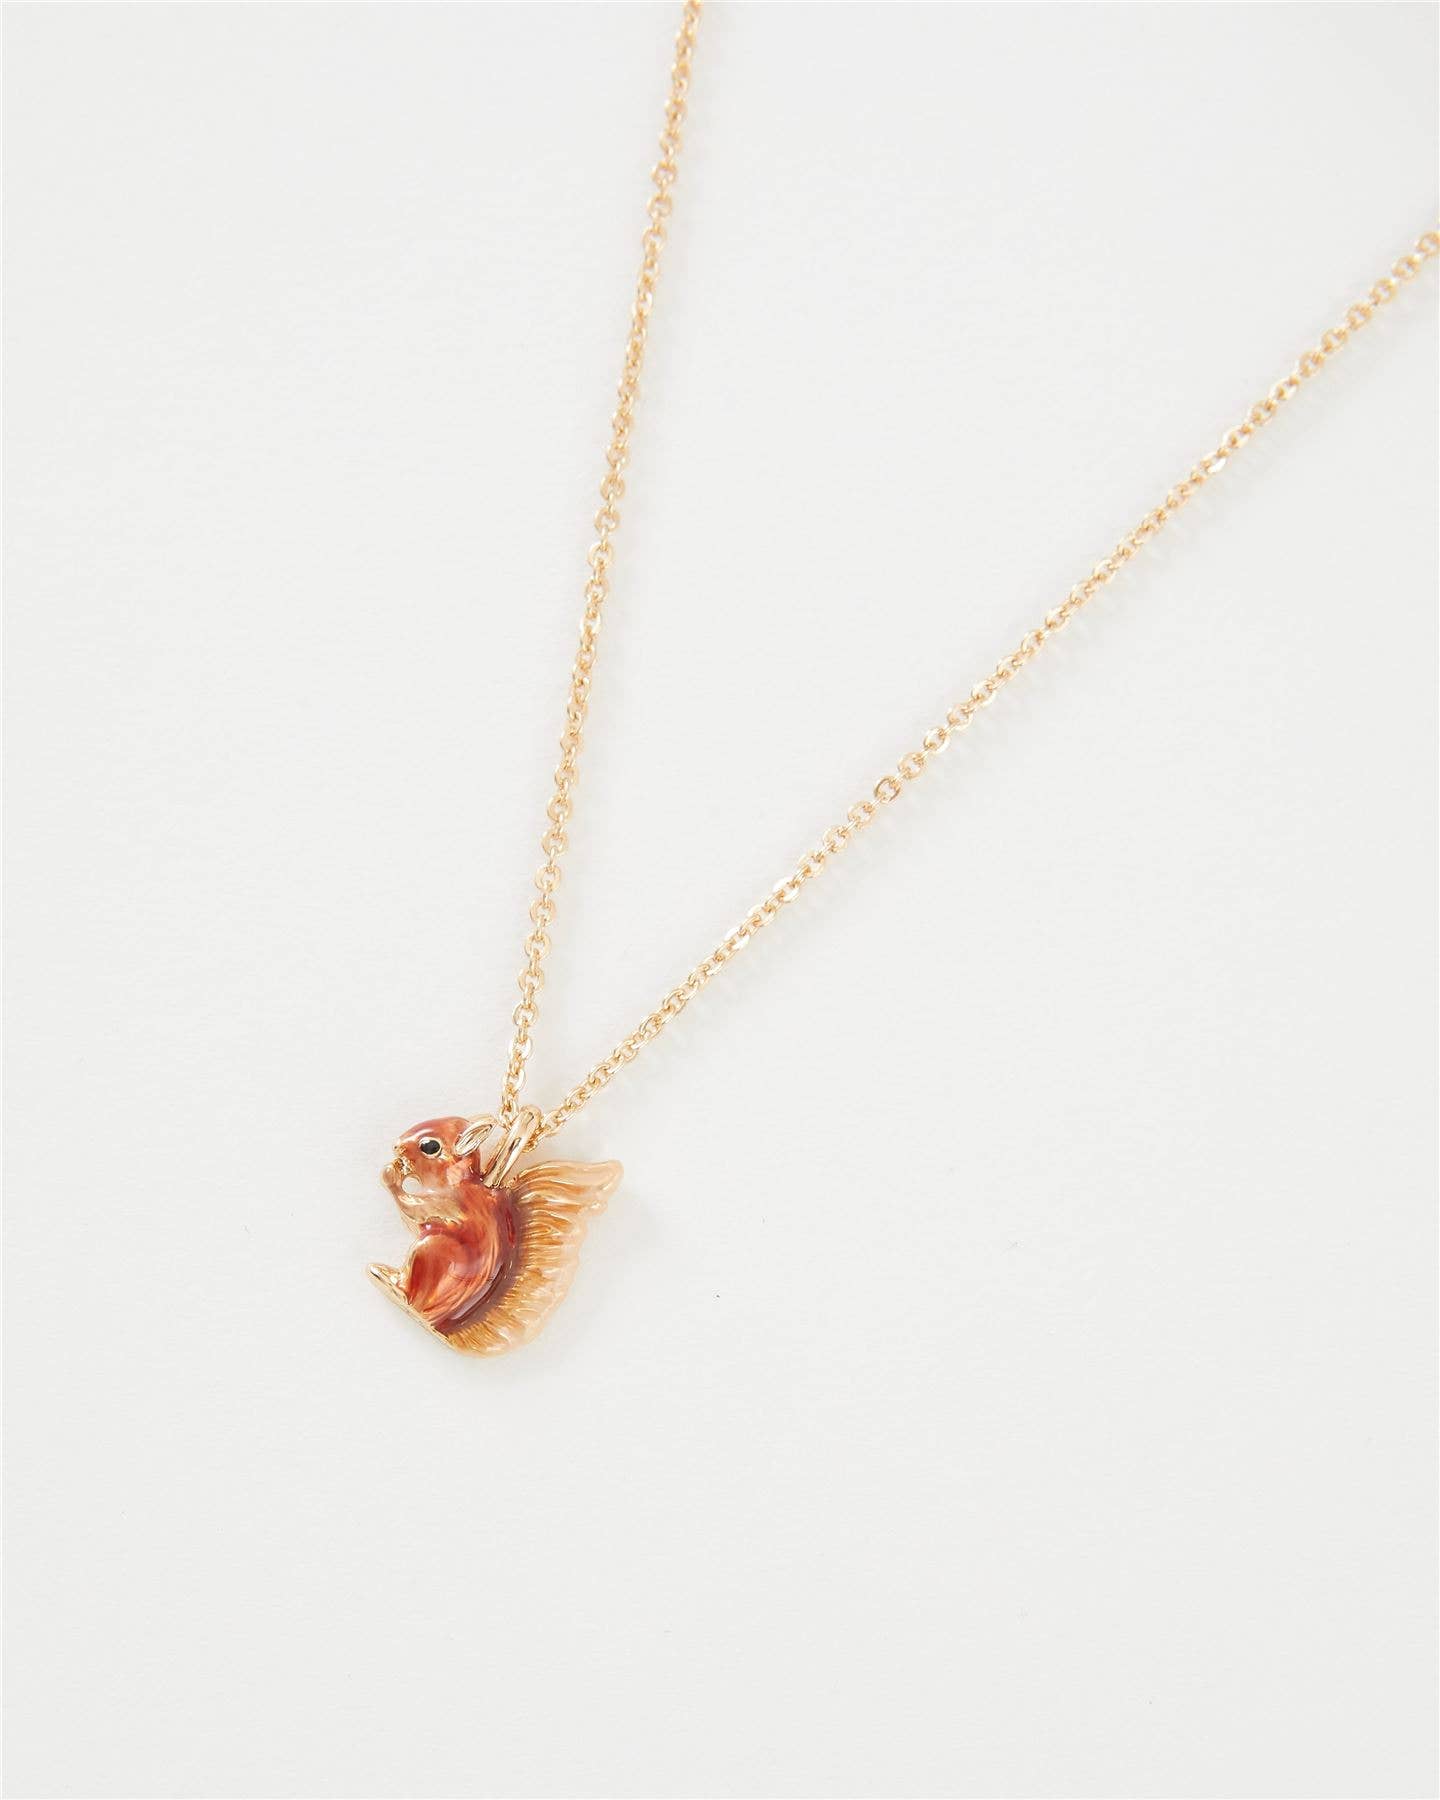 Fable Enamel Red Squirrel Necklace - Out of the Blue